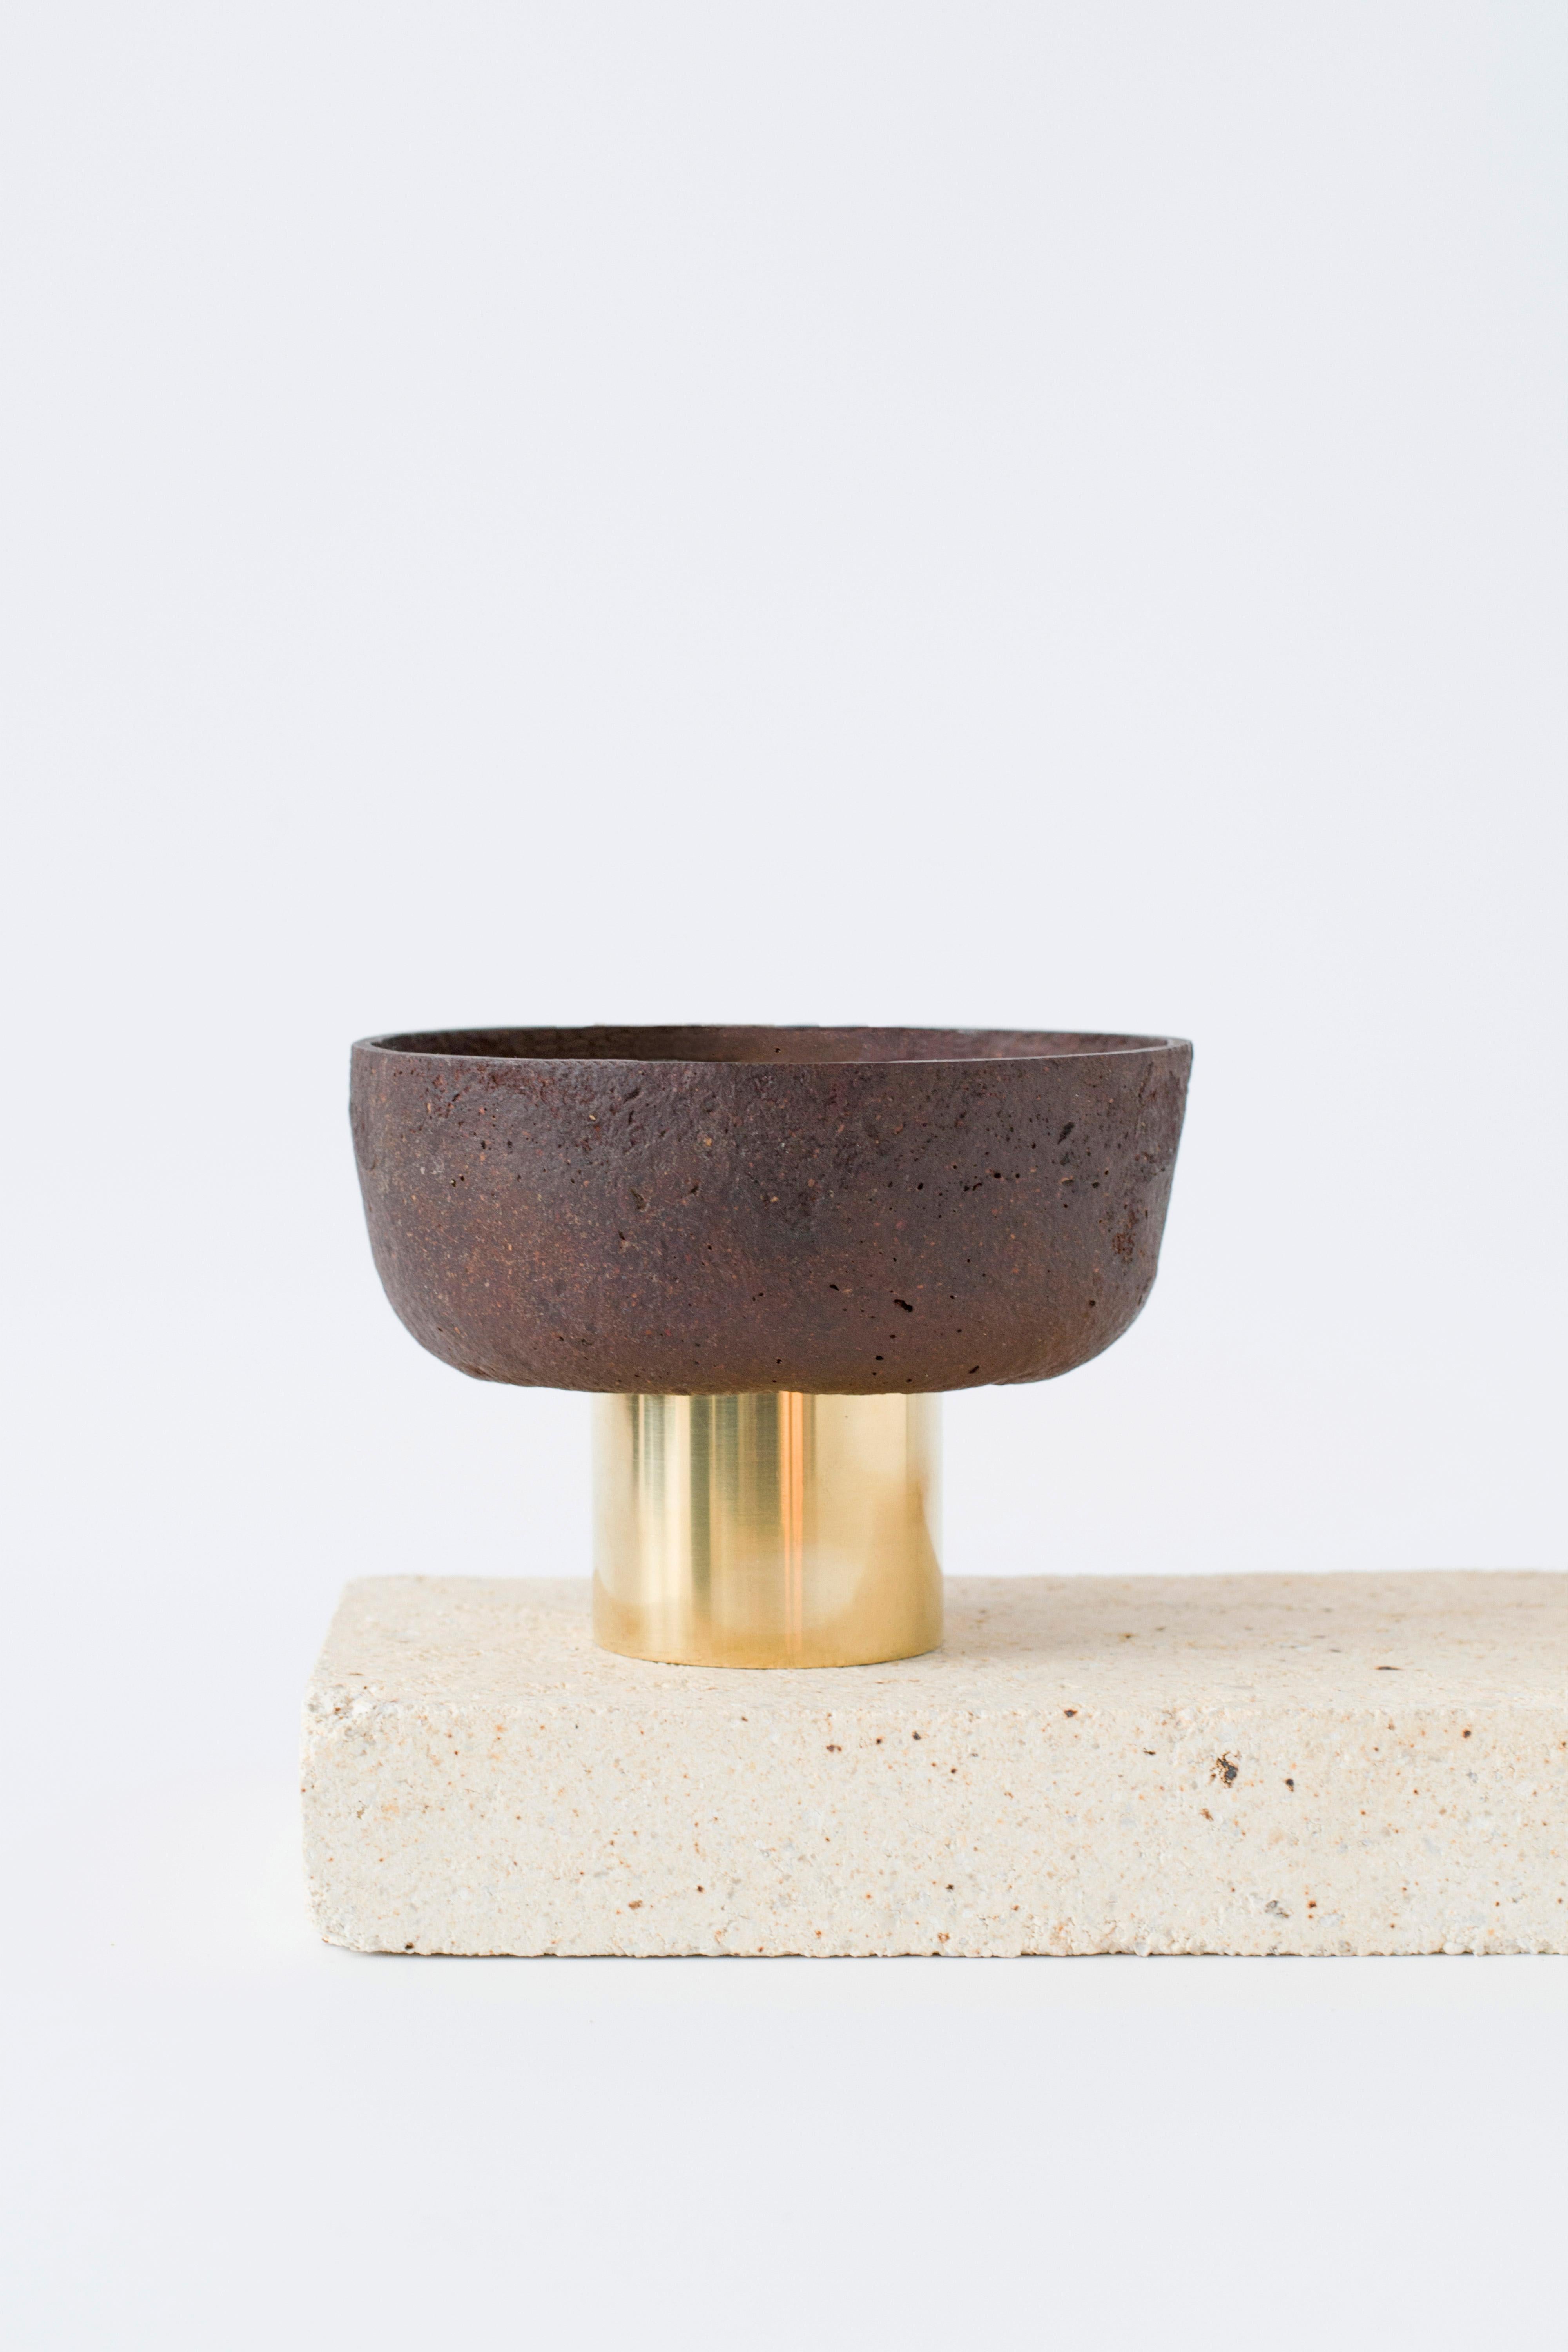 Pine pedestal bowl by Evelina Kudabaite Studio
Handmade
Materials: pine, brass
Dimensions: H 7.5 mm x D 12 mm
Colour: reddish
Notes: for dry use

Since 2015, product designer Evelina Kudabaite keeps on developing and making GIRIA objects. Designer